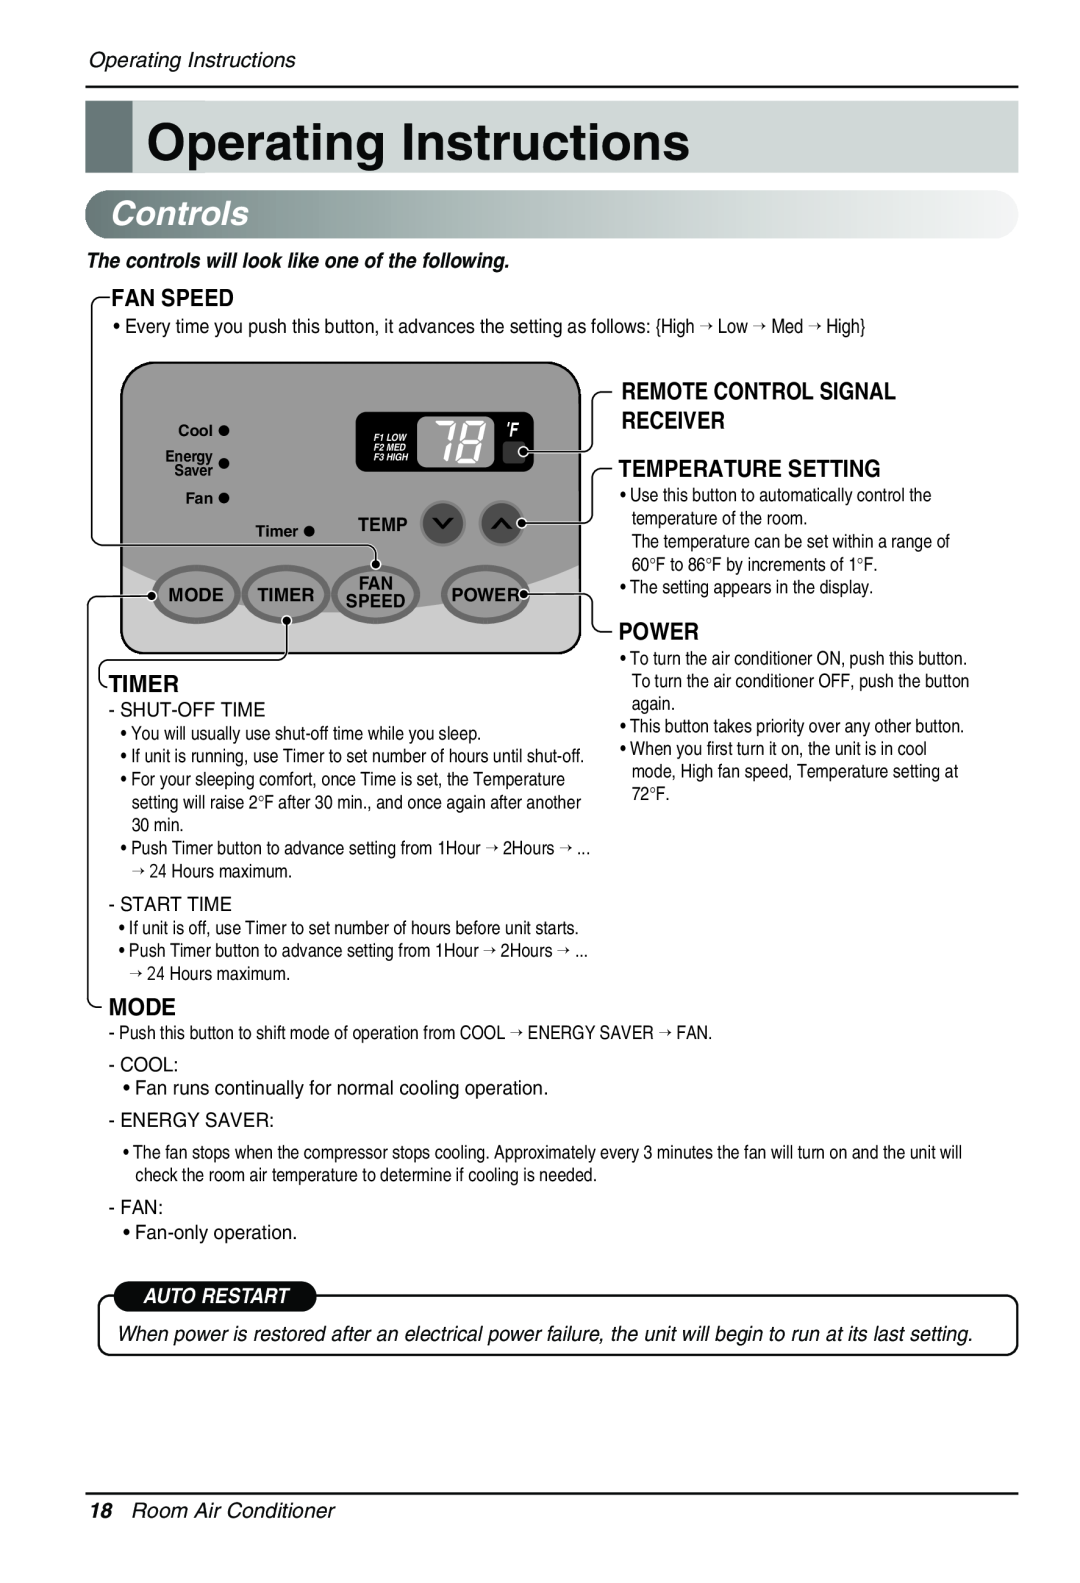 Sears LT123CNR Operating Instructions, Controls, The controls will look like one of the following, Auto Restart, Temp 